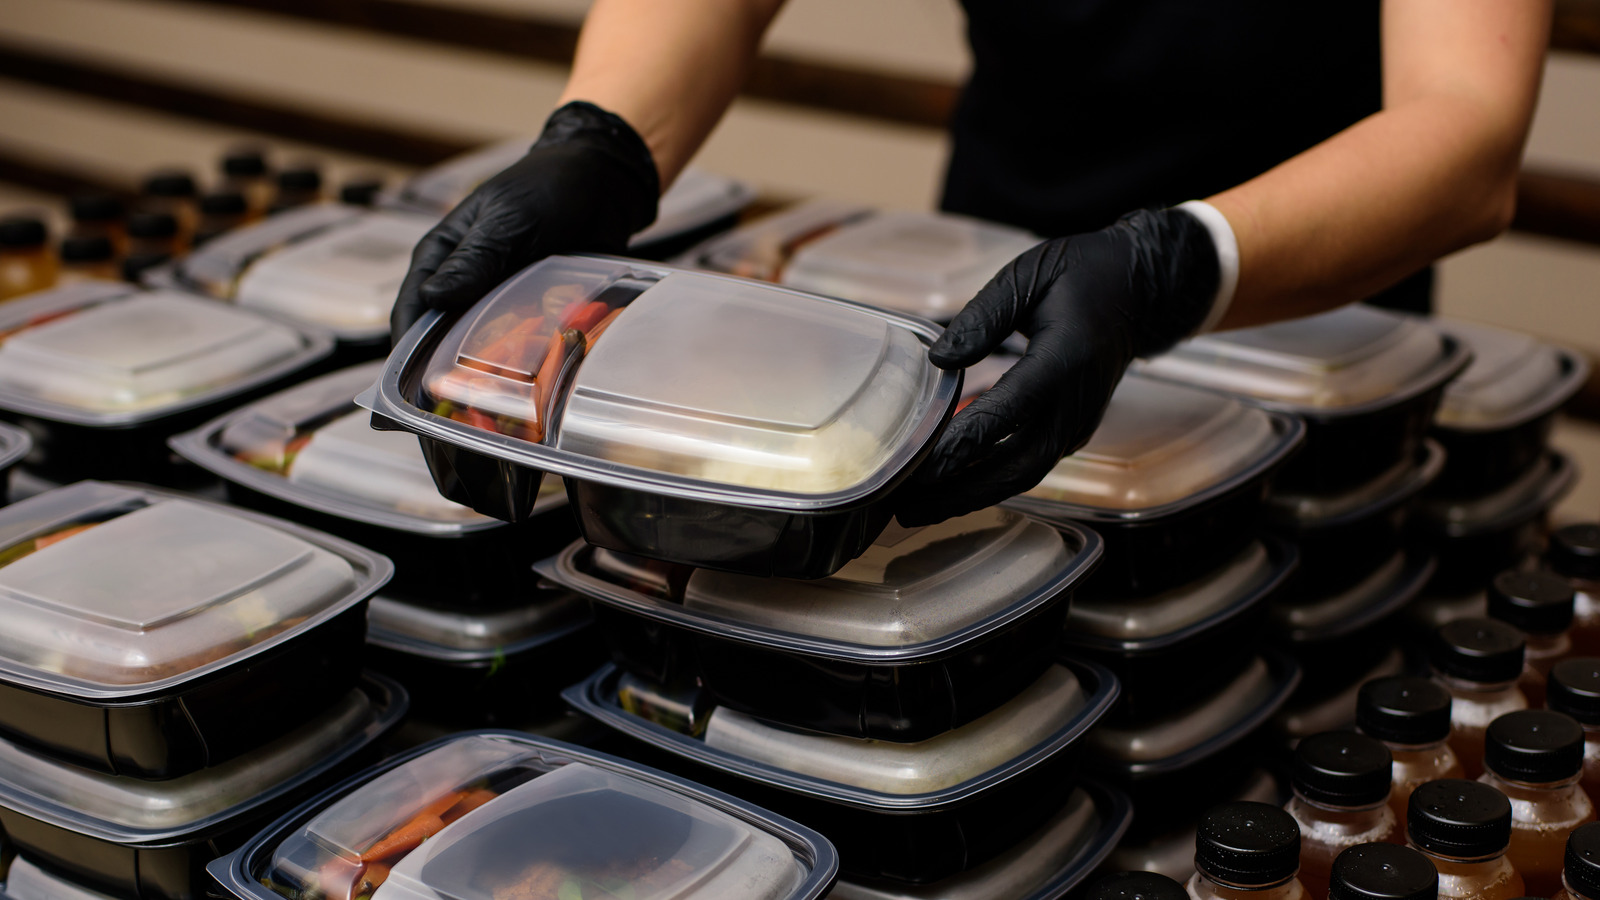 Plastic Food Containers and Dishes